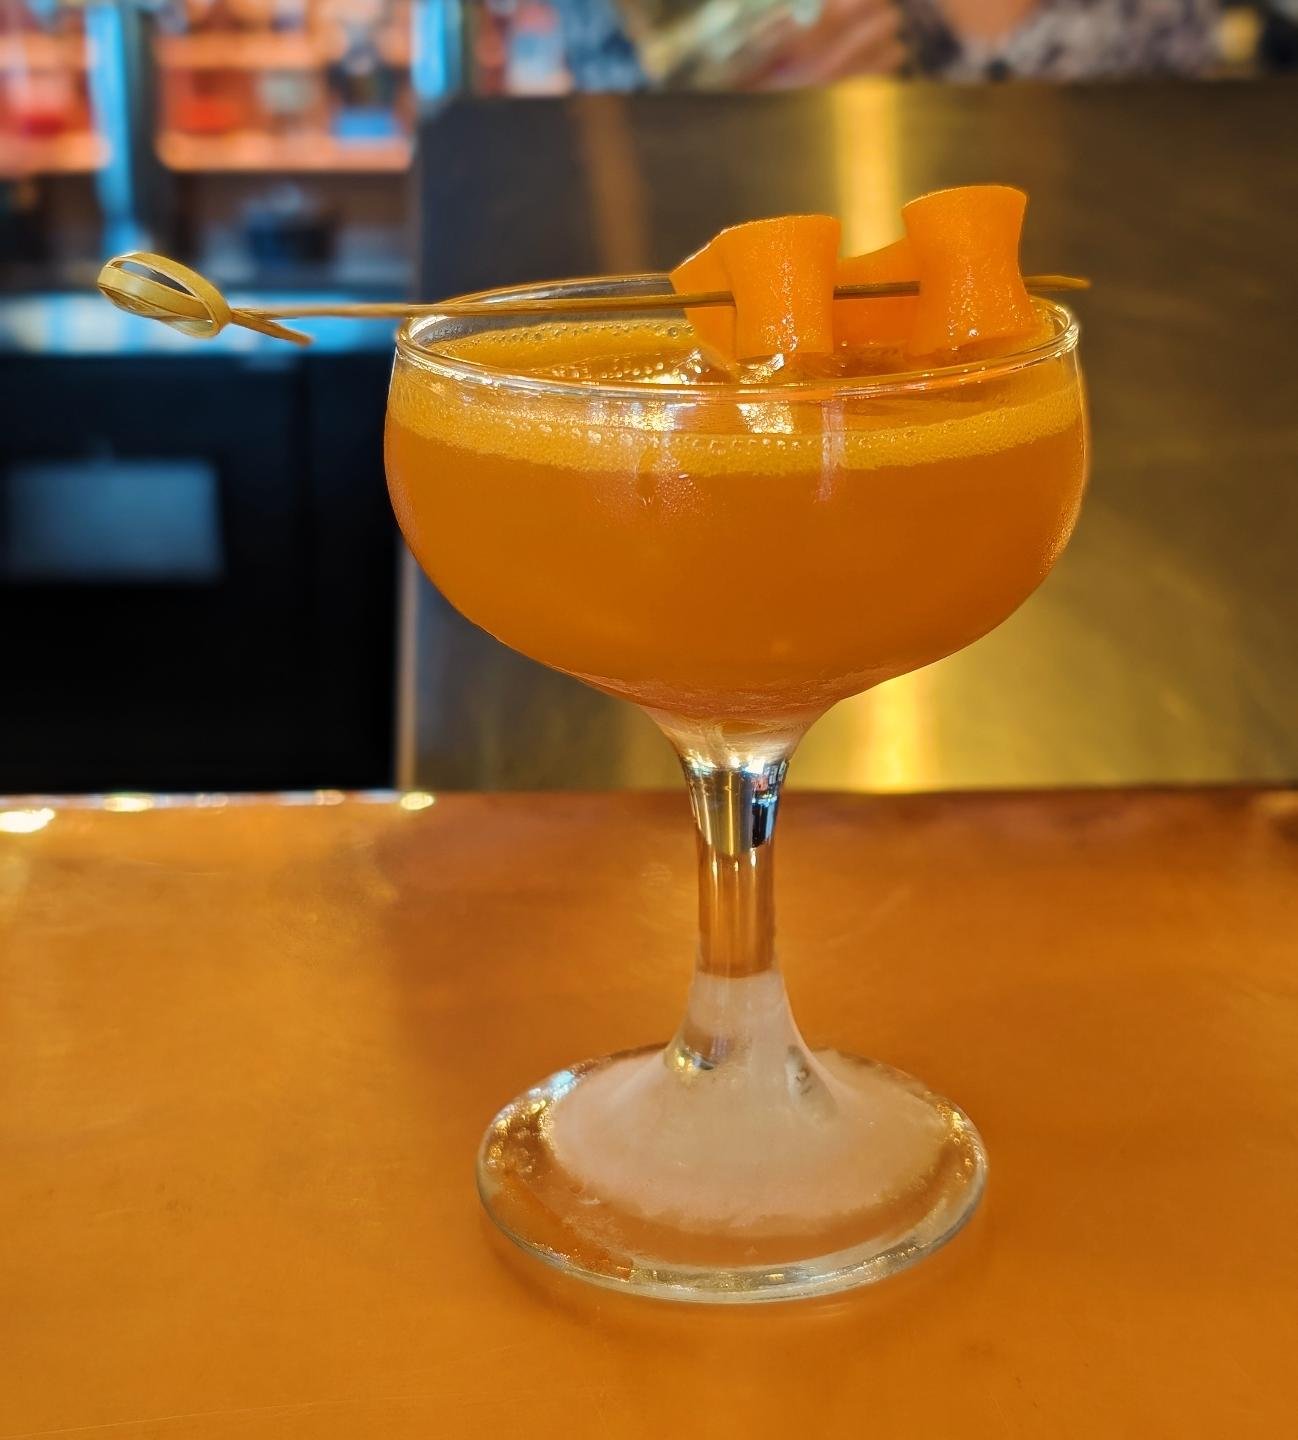 &quot;What a lucky girl.&quot; Jessica Rabbit slides in with bourbon, carrot lemon and brown sugar. &quot;It will be beautiful!&quot;